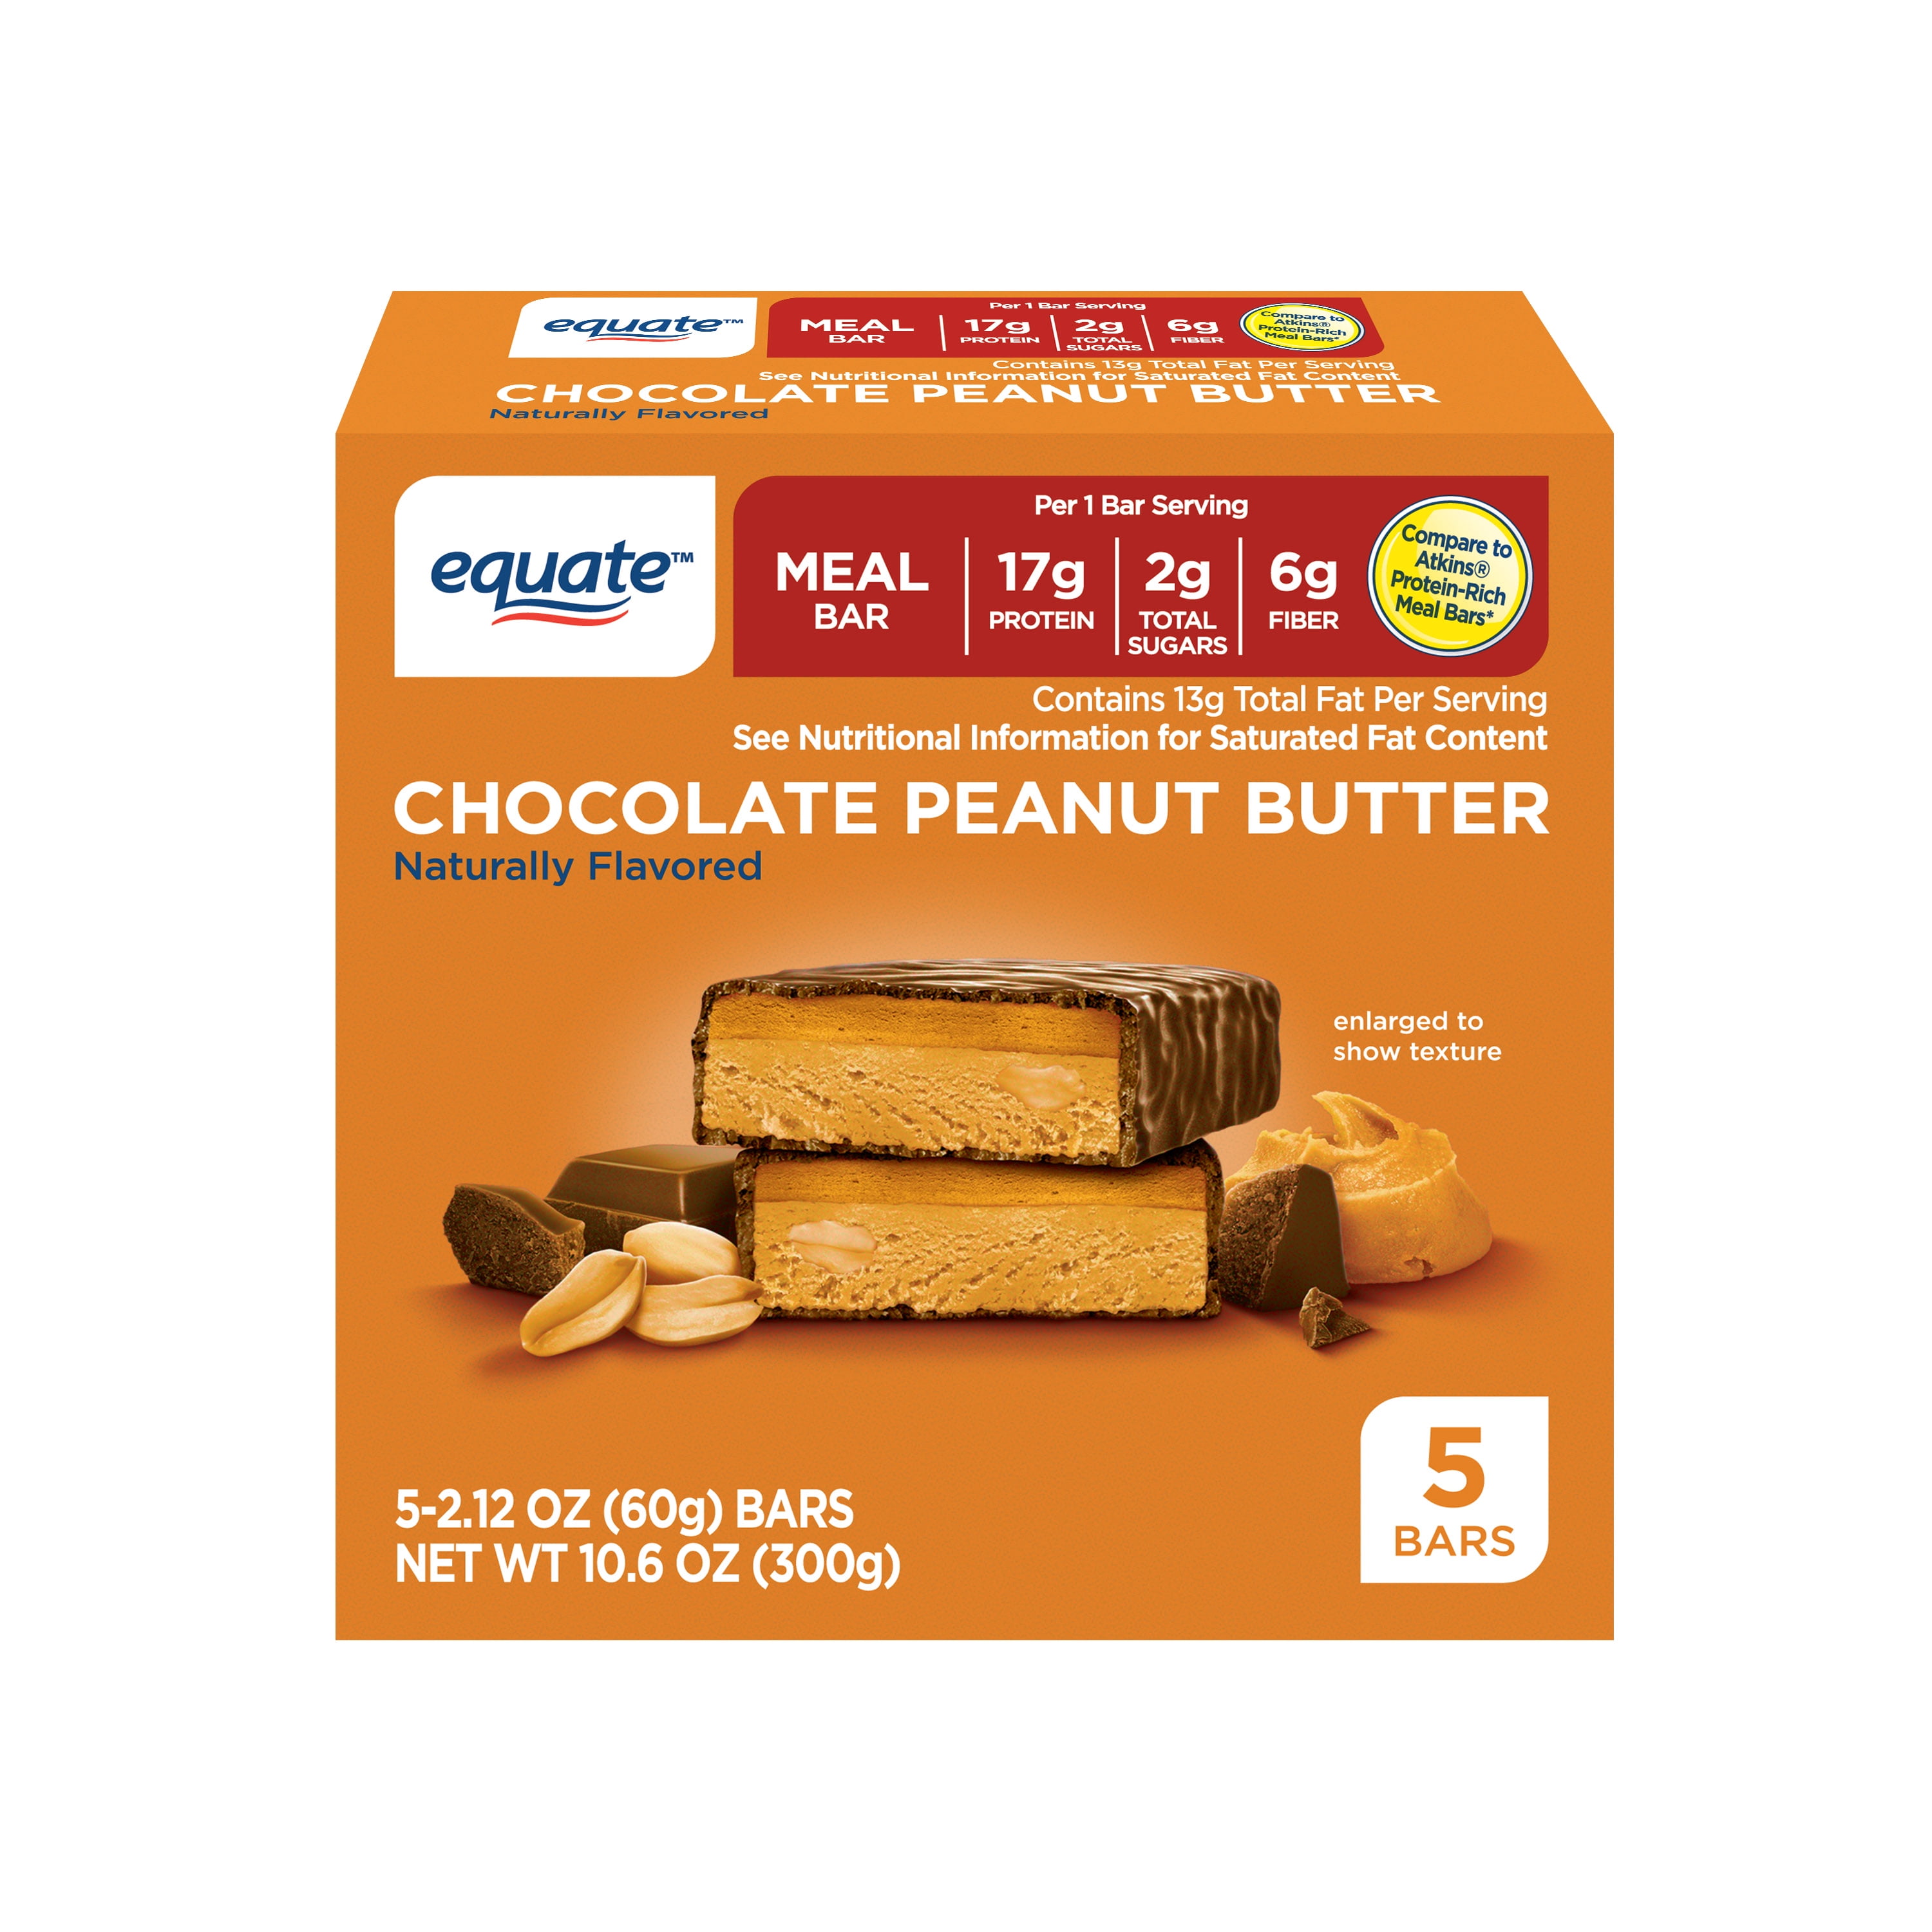 Equate Chocolate Peanut Butter Meal Bar, 5 Count